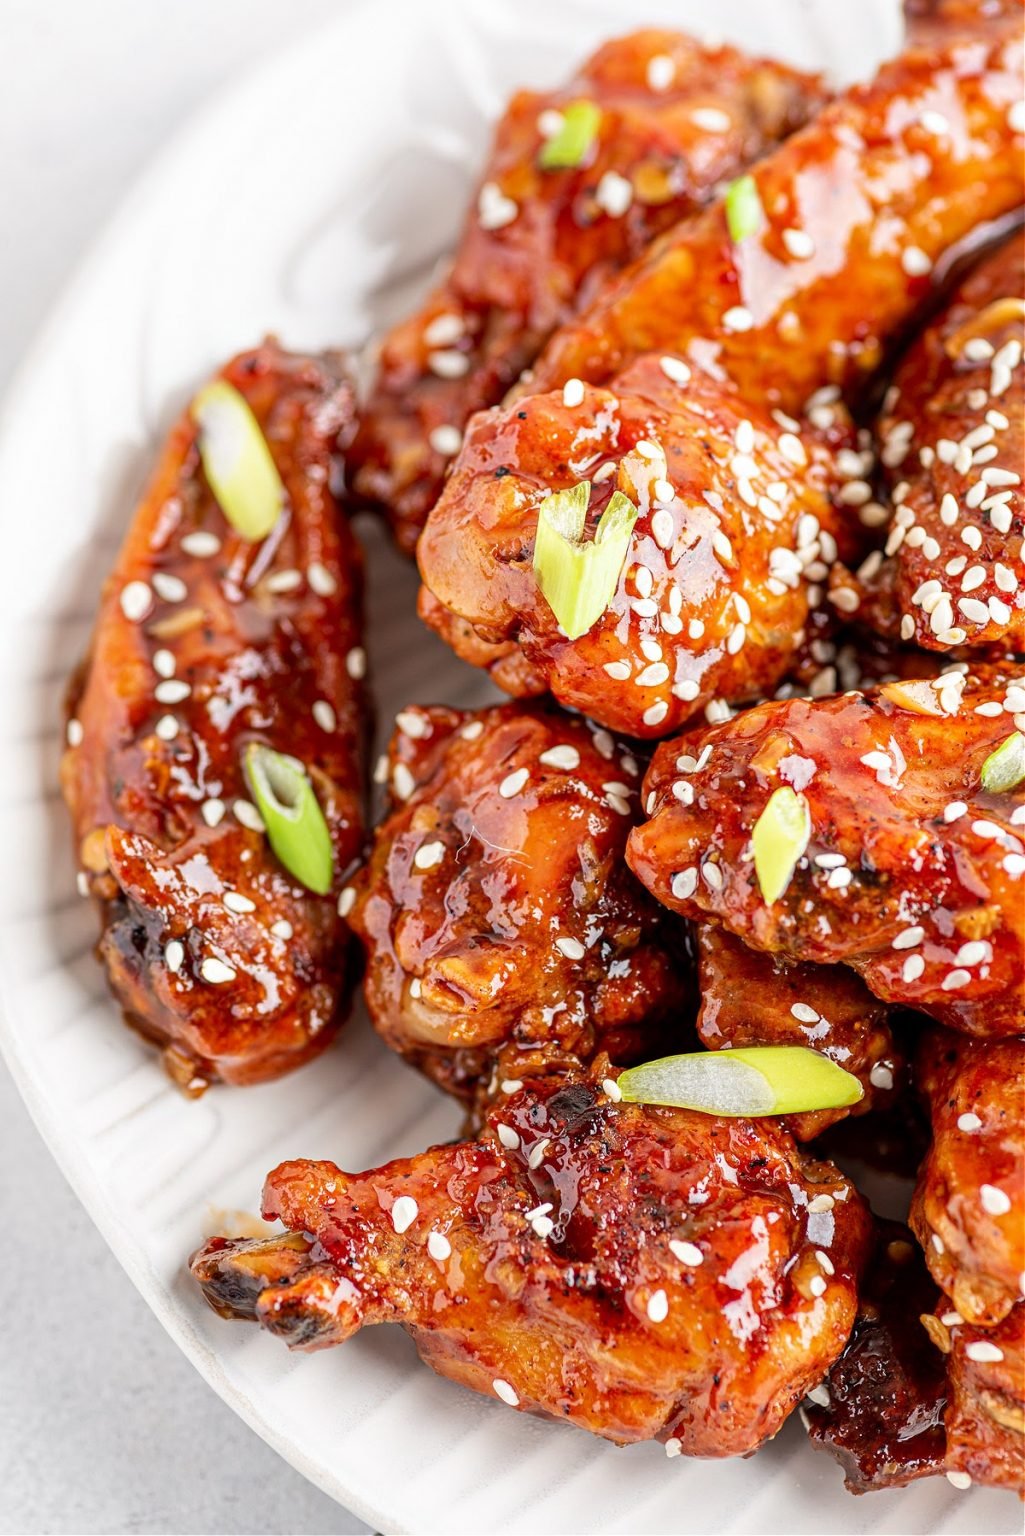 Keto Sweet Chili Sticky Asian Chicken Wings Recipe - Dr. Davinah&amp;#39;s Eats